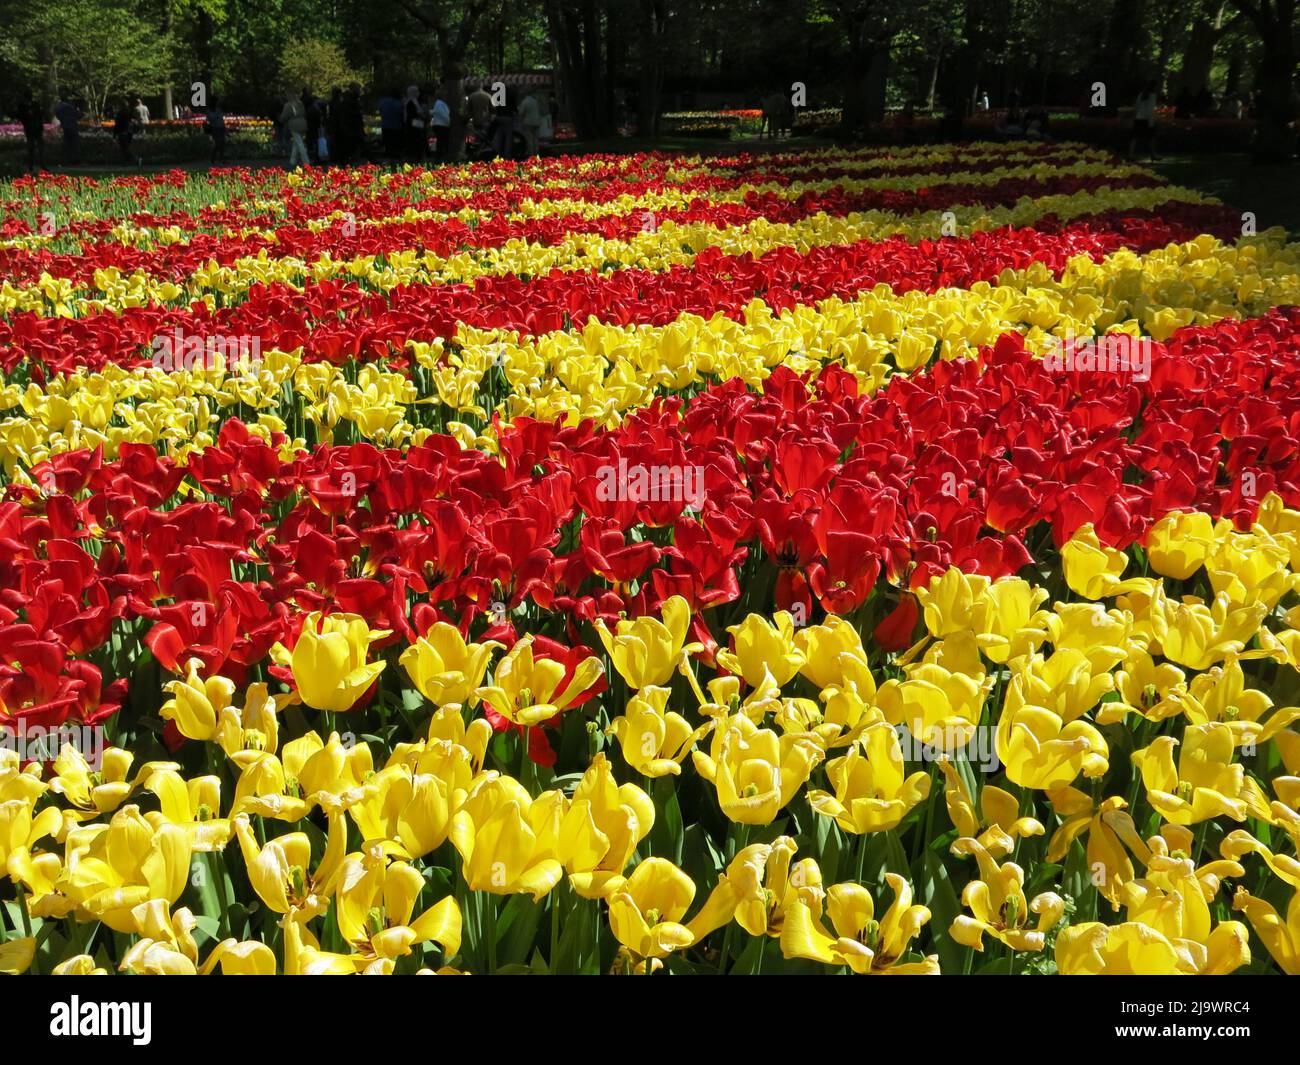 Stripes of red & yellow tulips as far as the eye can see: the mass planting of 7 million spring bulbs that is the annual flower festival at Keukenhof. Stock Photo